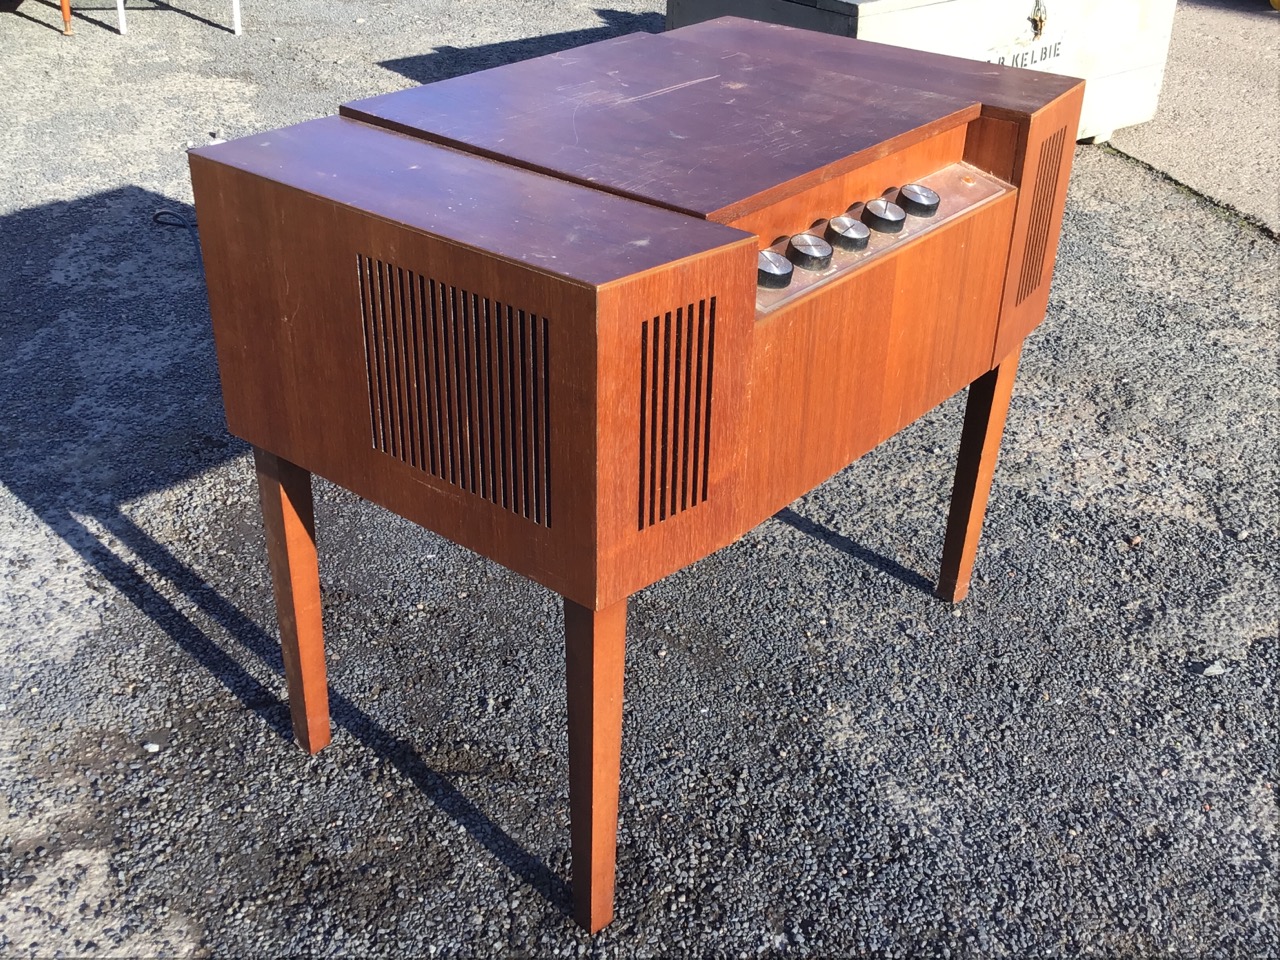 A 60s mahogany HMV stereo record player with perspex control panel and brushed aluminium knobs - Image 2 of 3